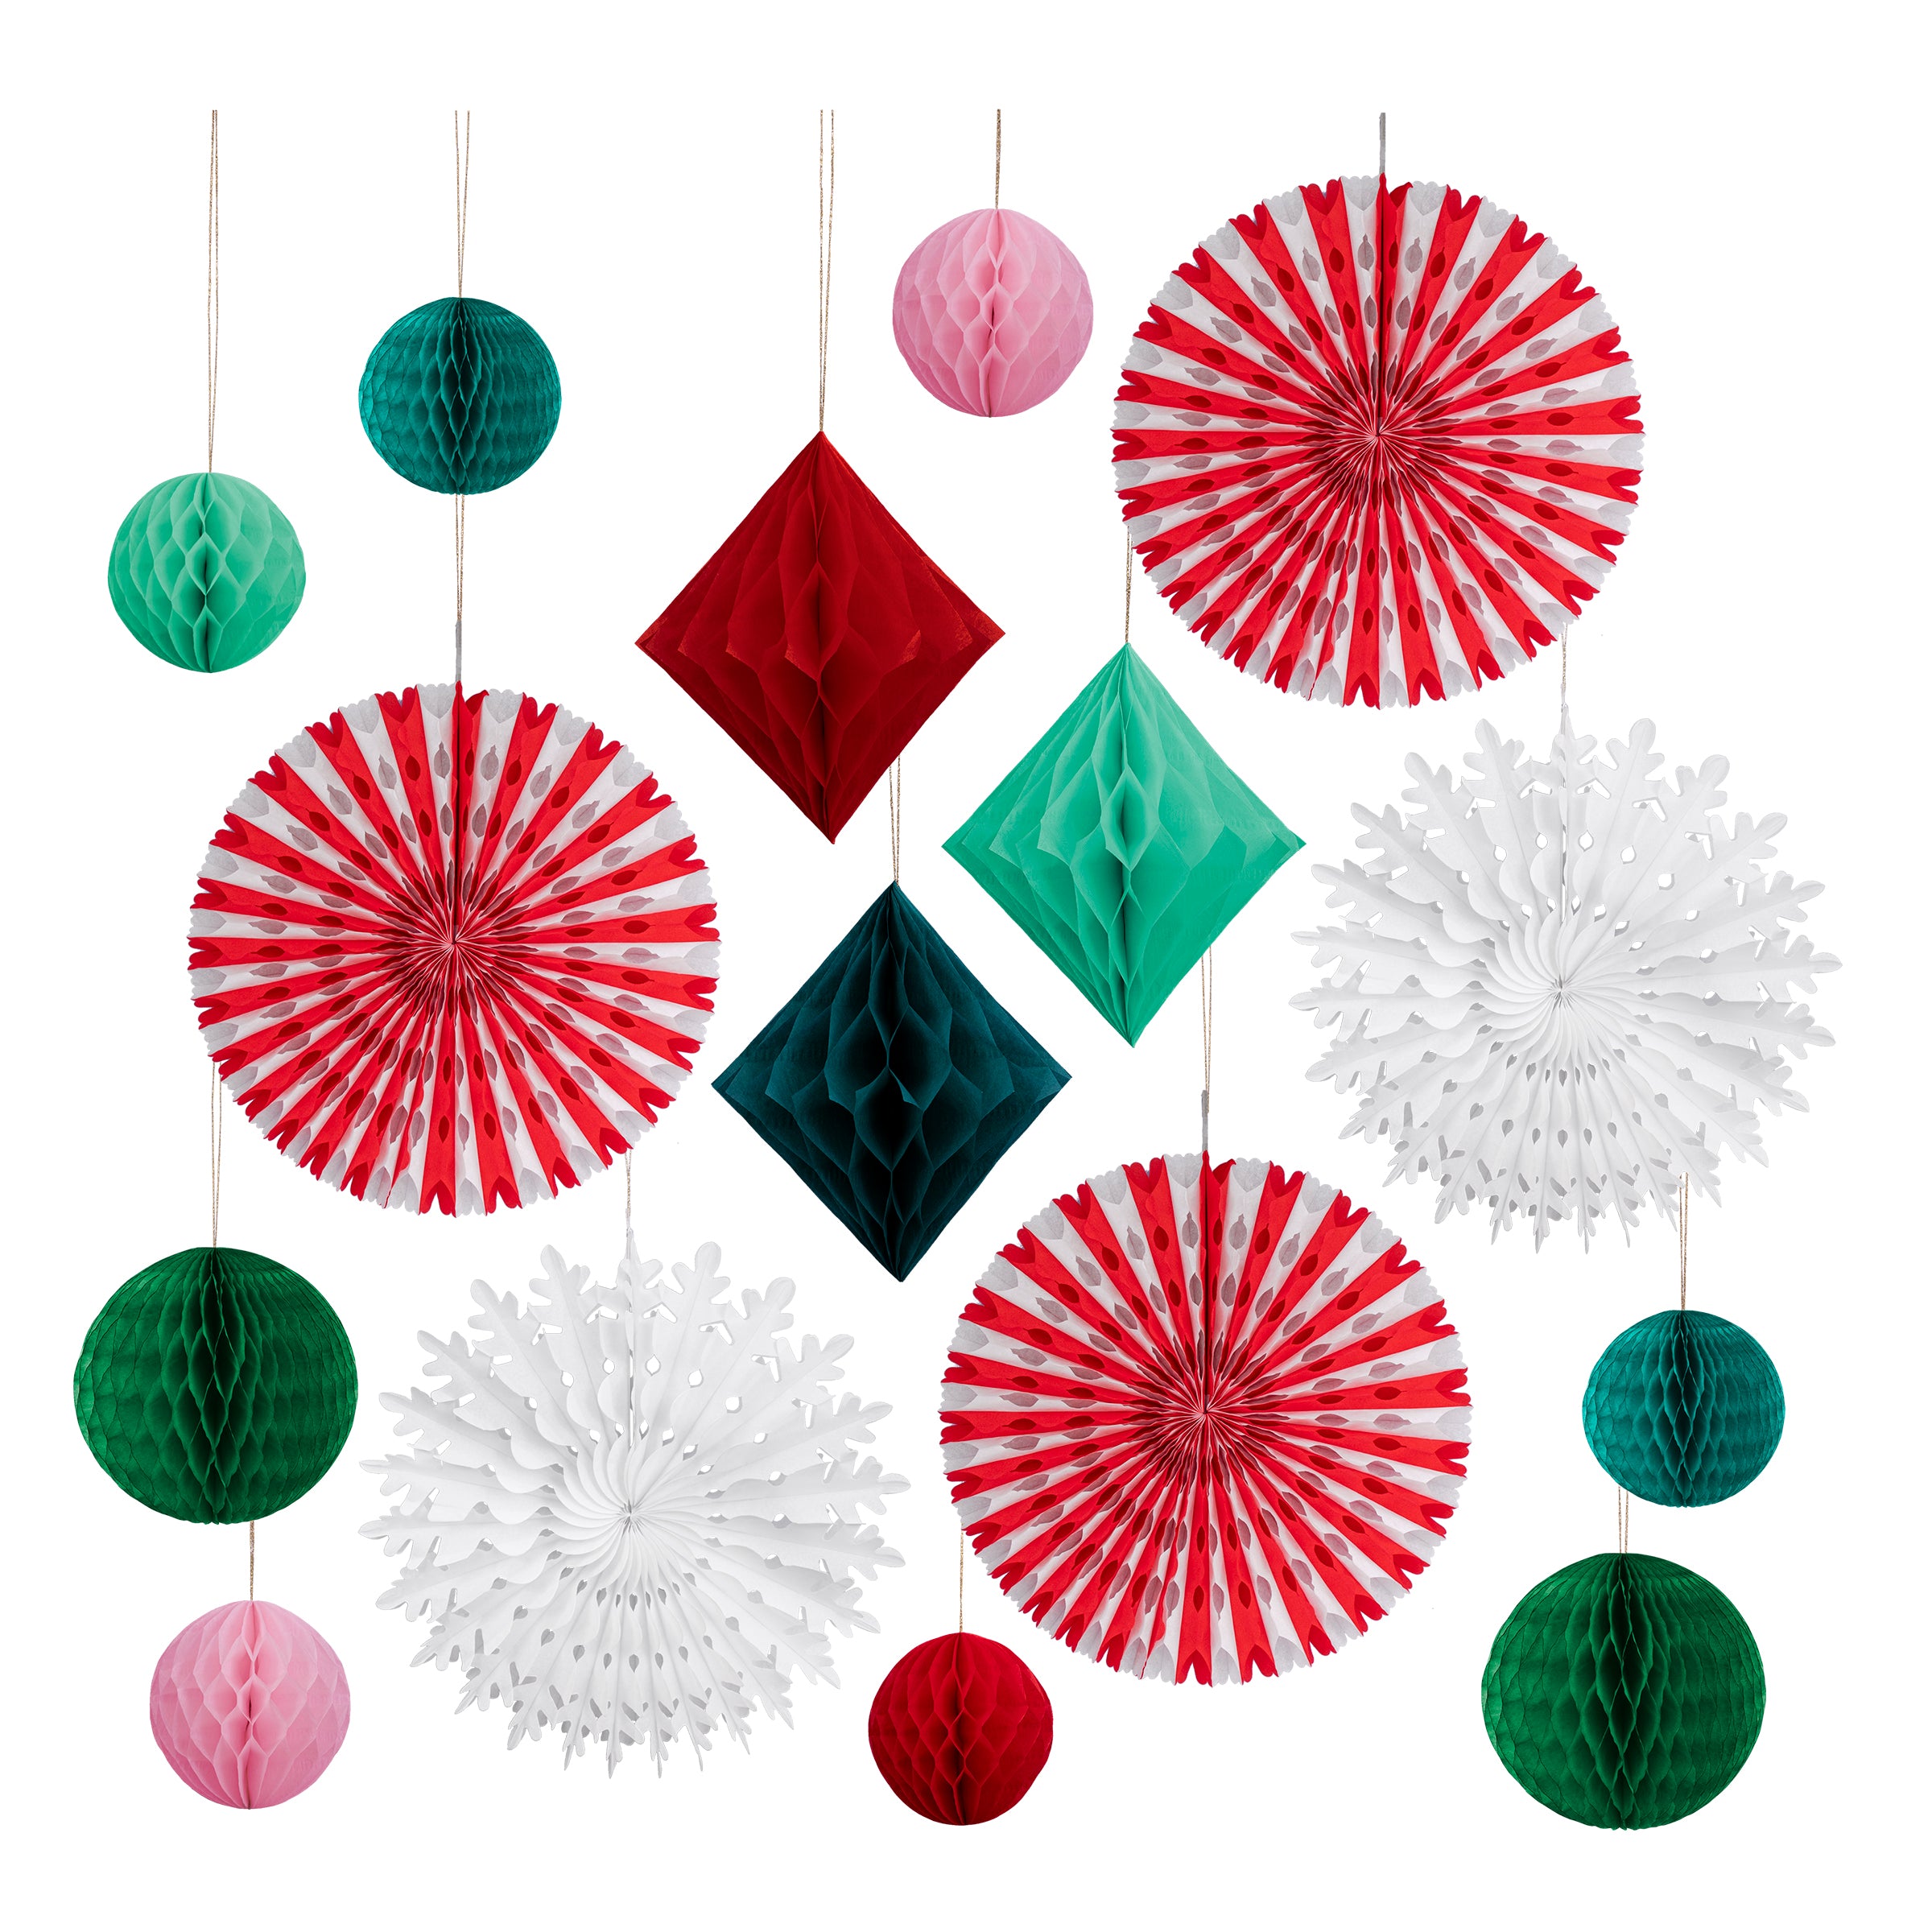 Our honeycomb Christmas decorations kit has 16 special designs in bright colors.